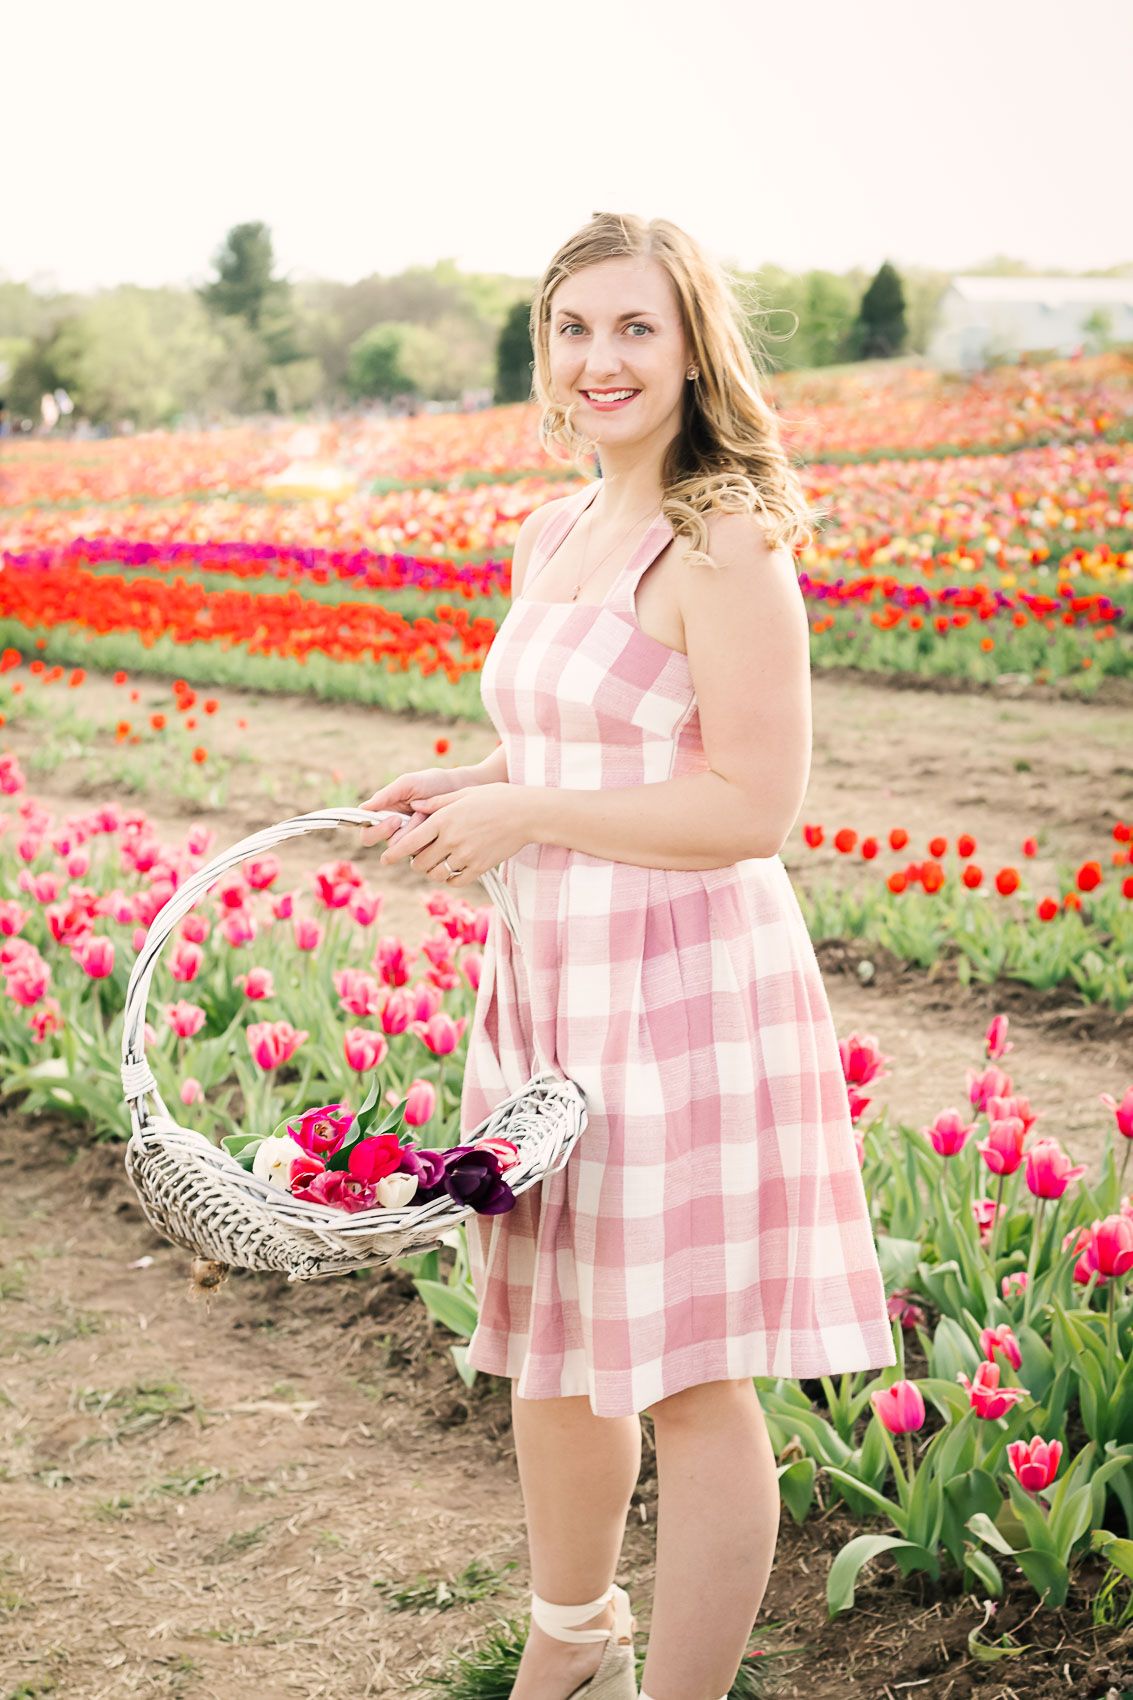 Flower picking in a pink Gal Meets Glam Collection pink gingham dress at Burnside Farms in Nokesville, Virginia | pictures of tulips, castaner wedges, summer dress